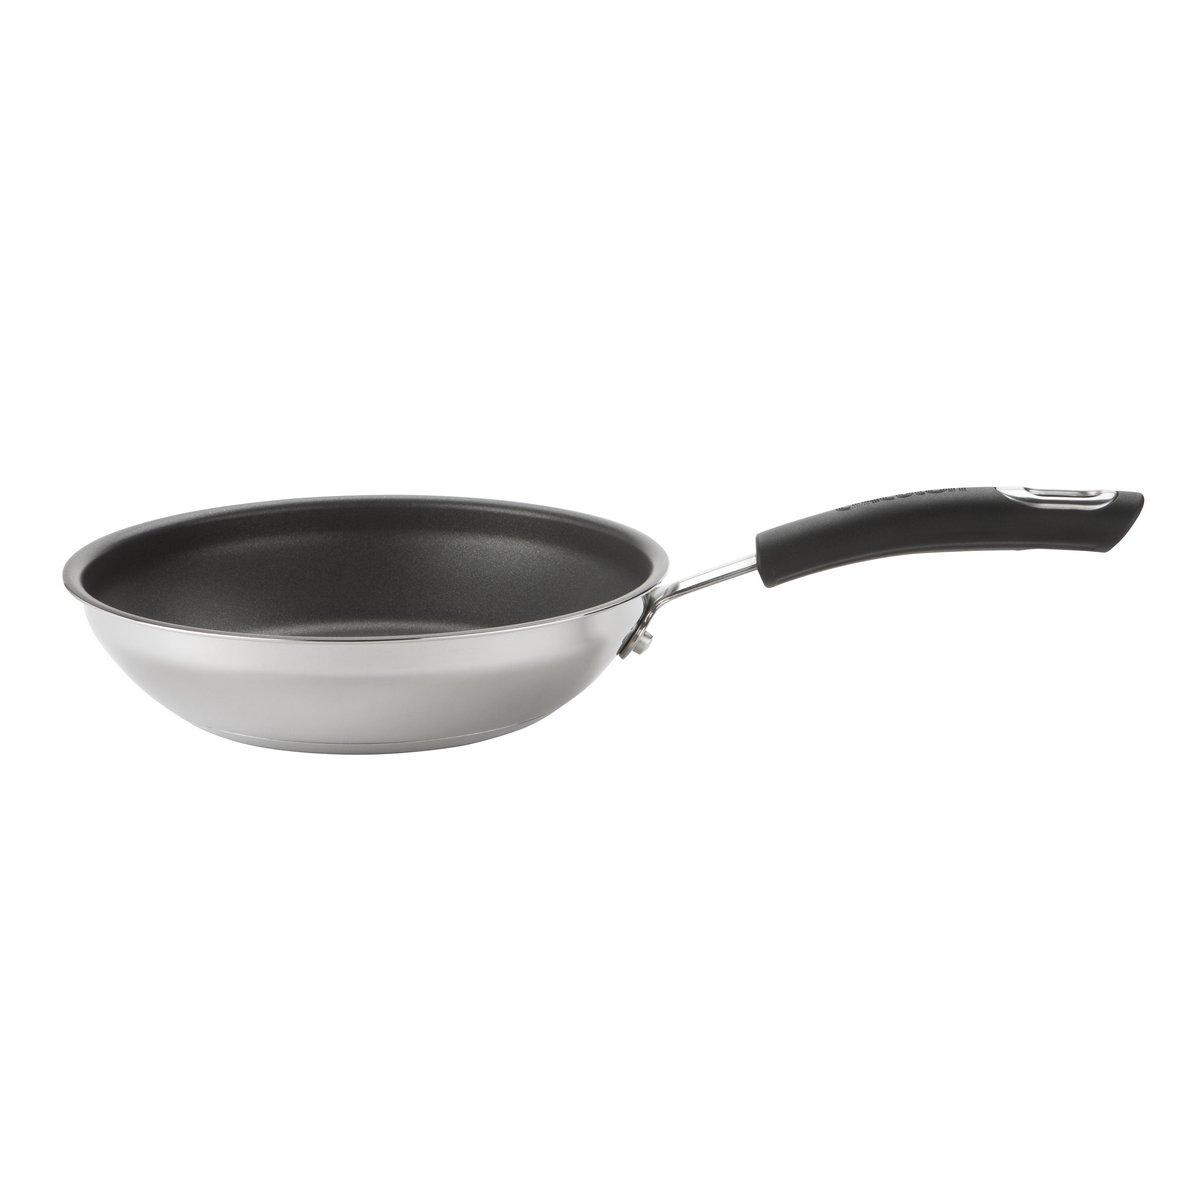 Black 'Total' Frying Pan Twin Pack Non Stick Cookware - 20cm & 28cm